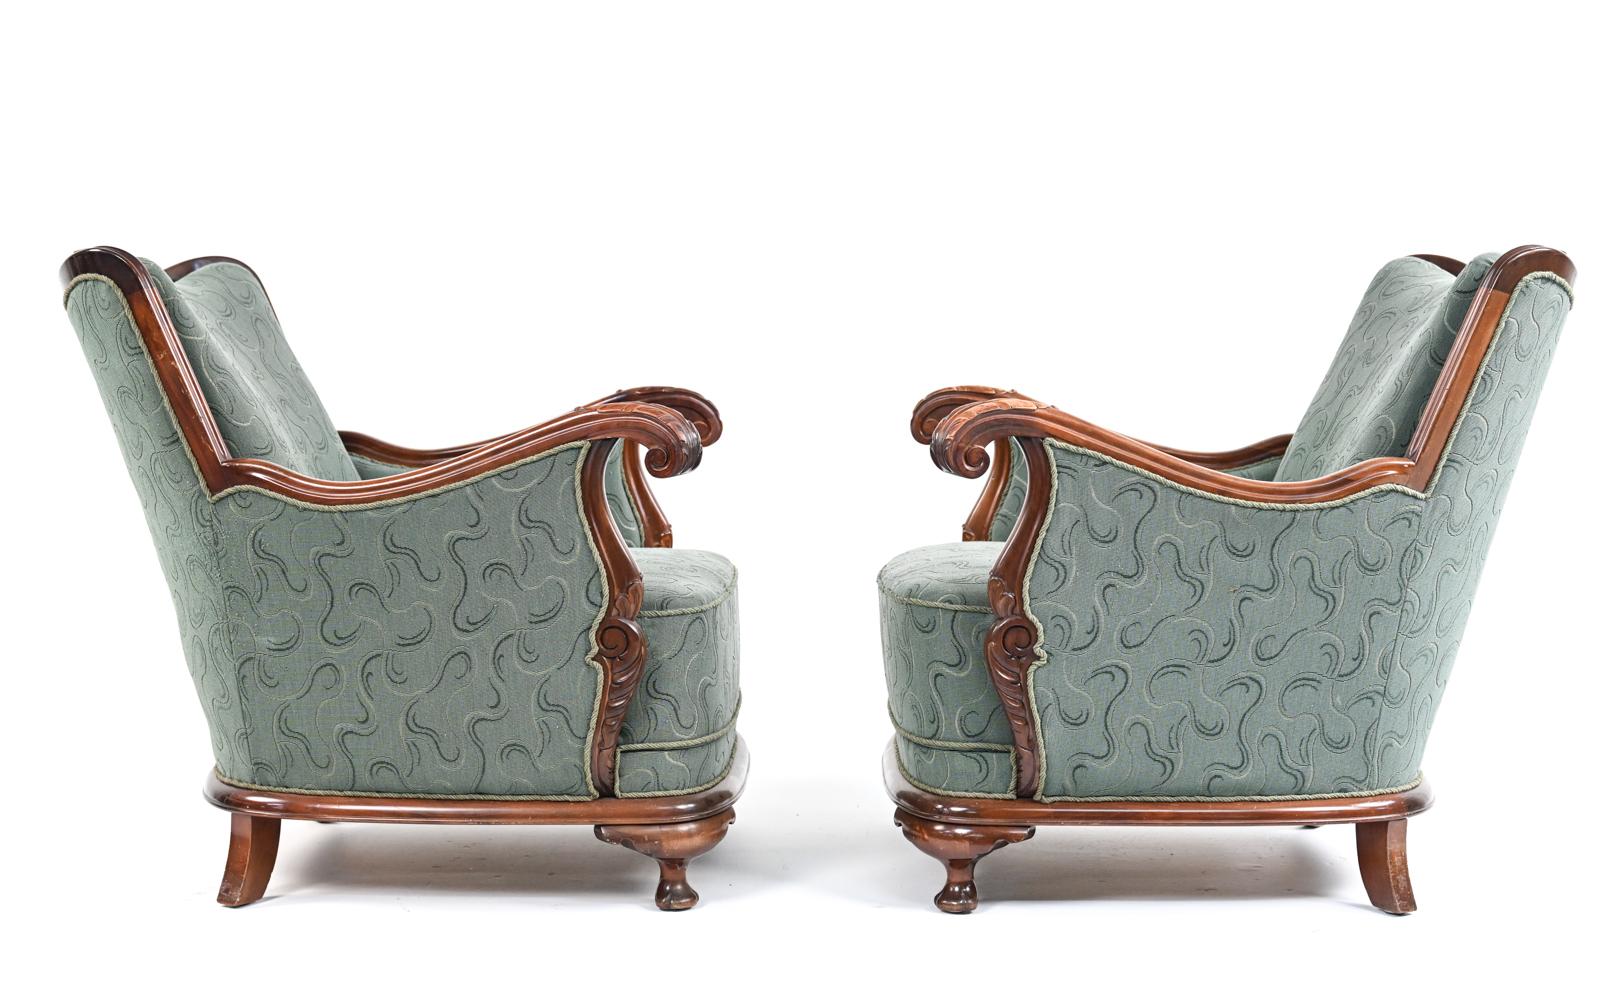 20th Century Pair of Early 20th C. Scandinavian Carved Club Chairs